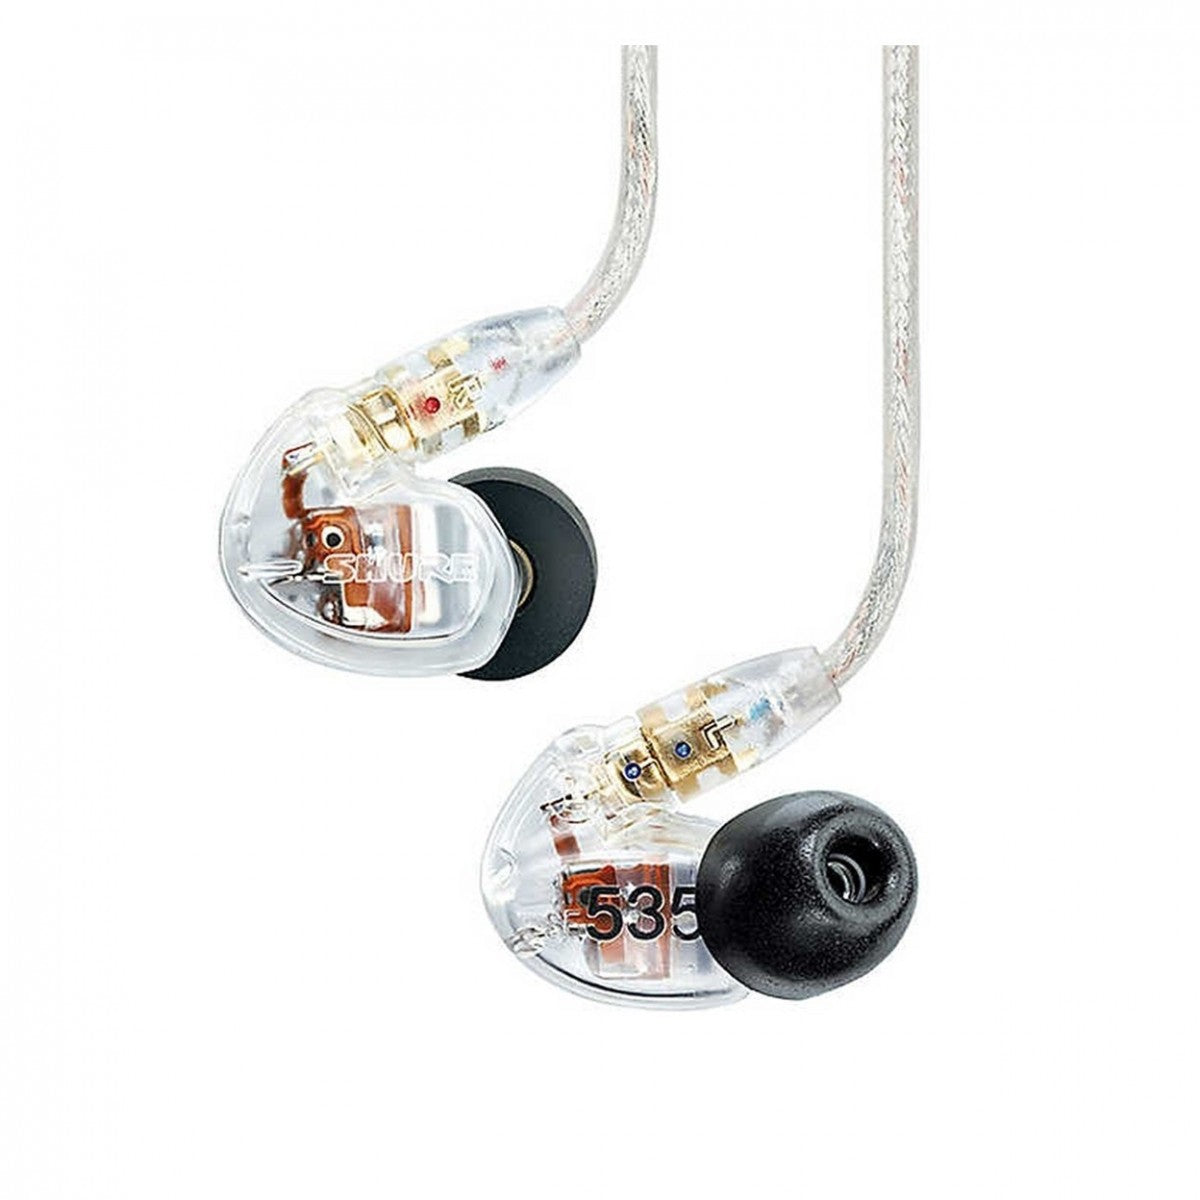 Shure SE535 Sound Isolating Earphones with True Wireless - Clear